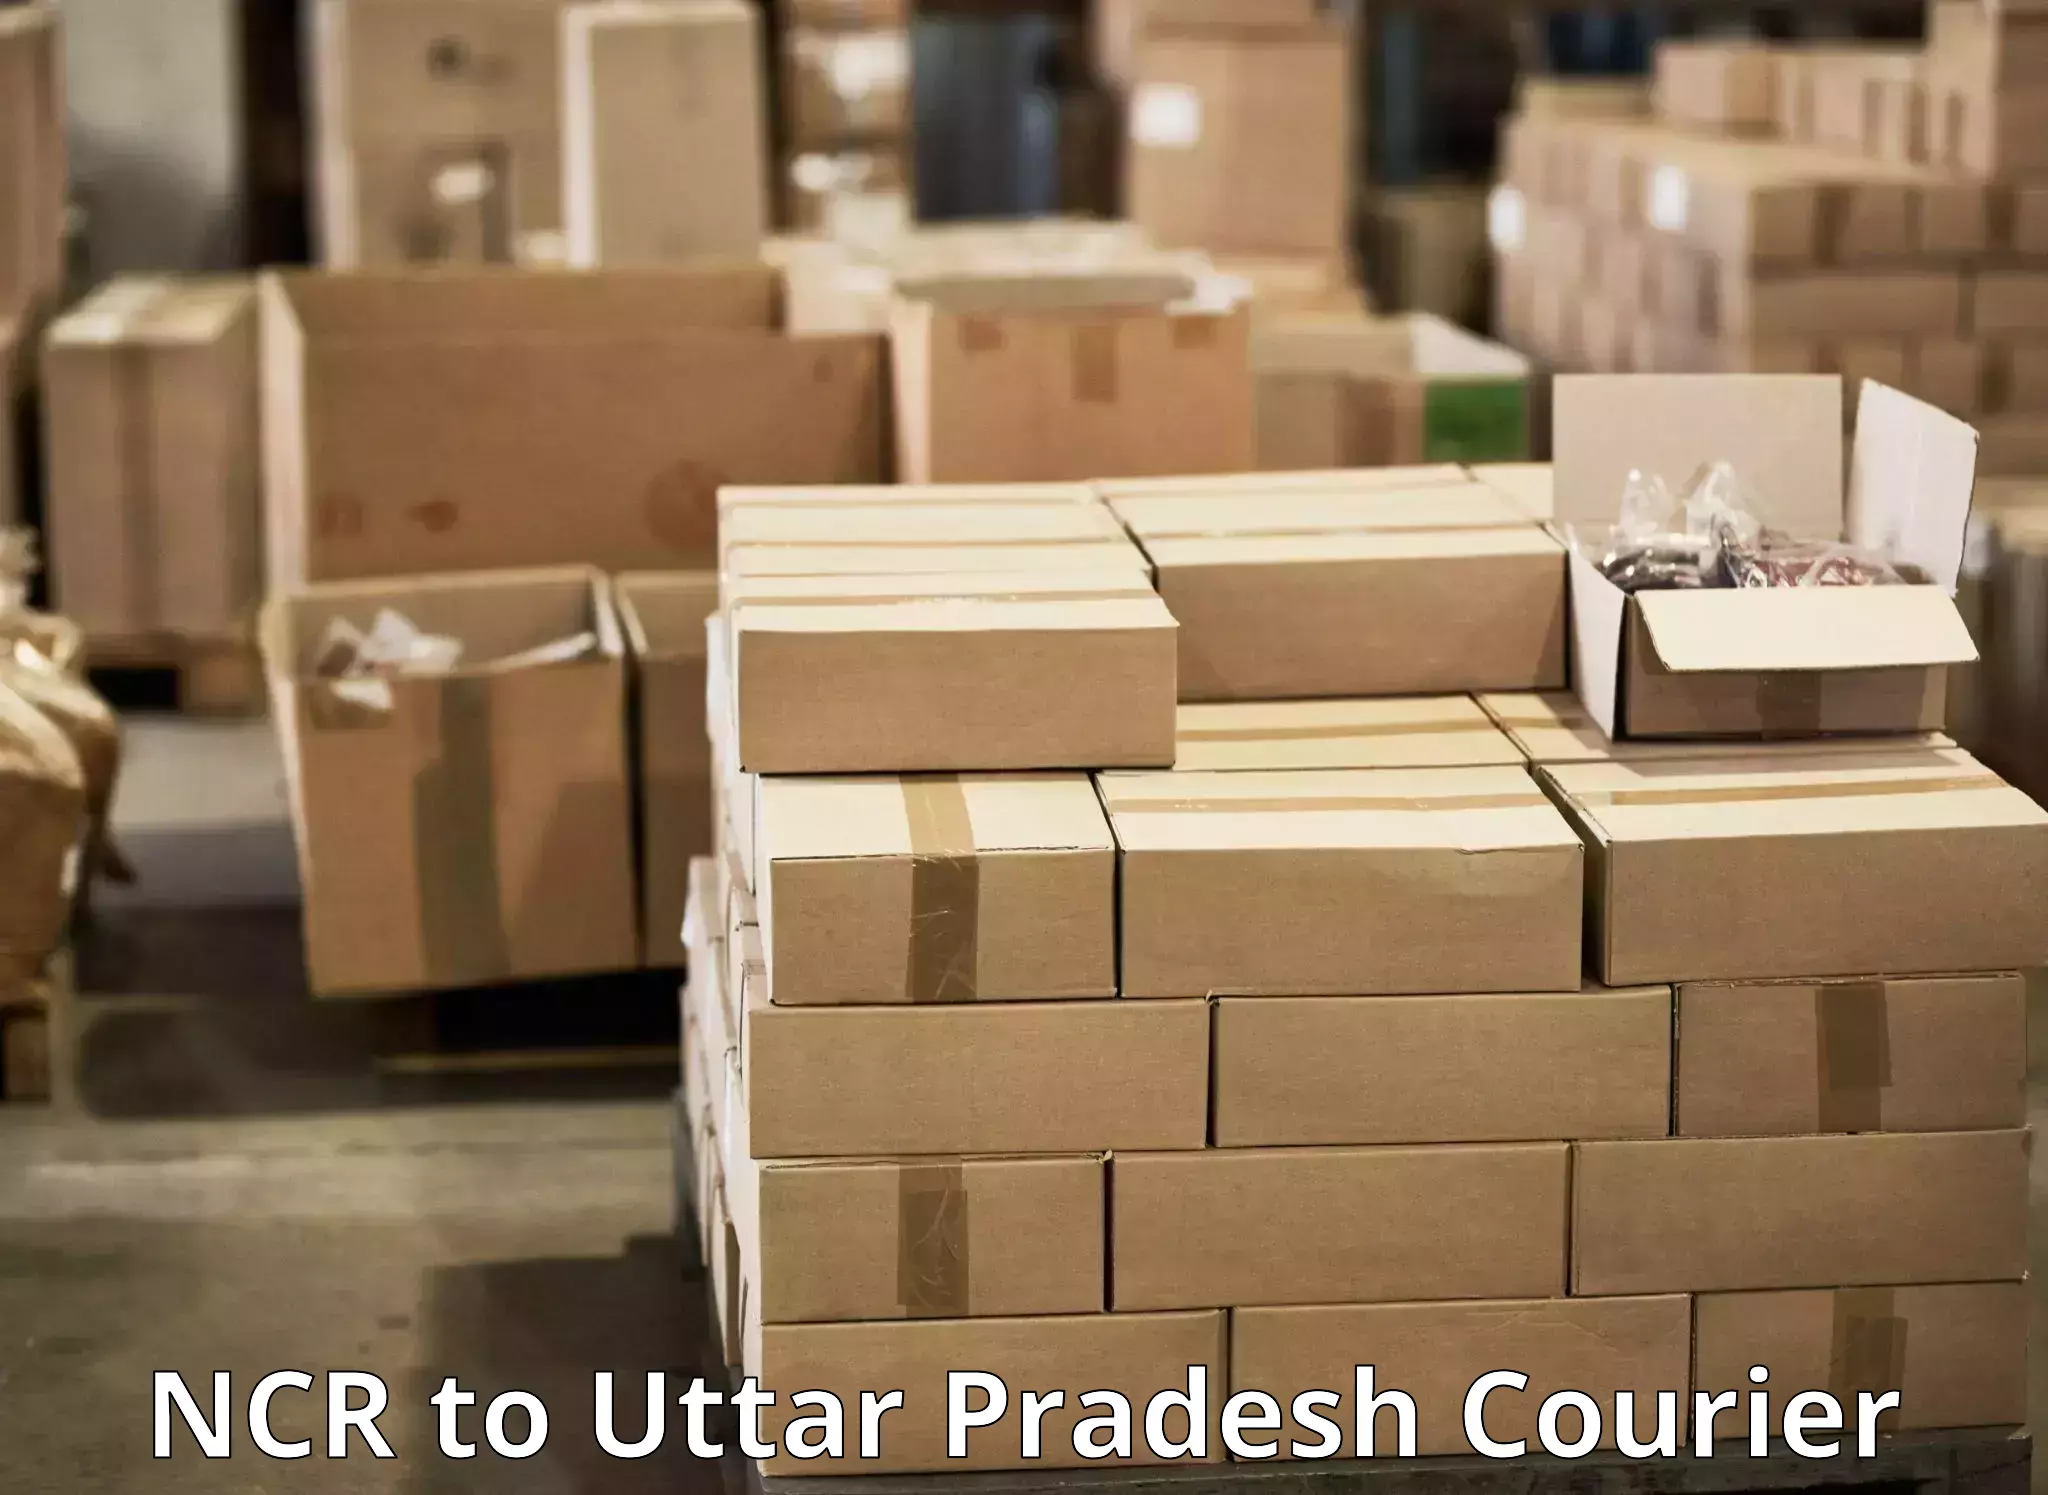 Efficient order fulfillment NCR to Kirauli